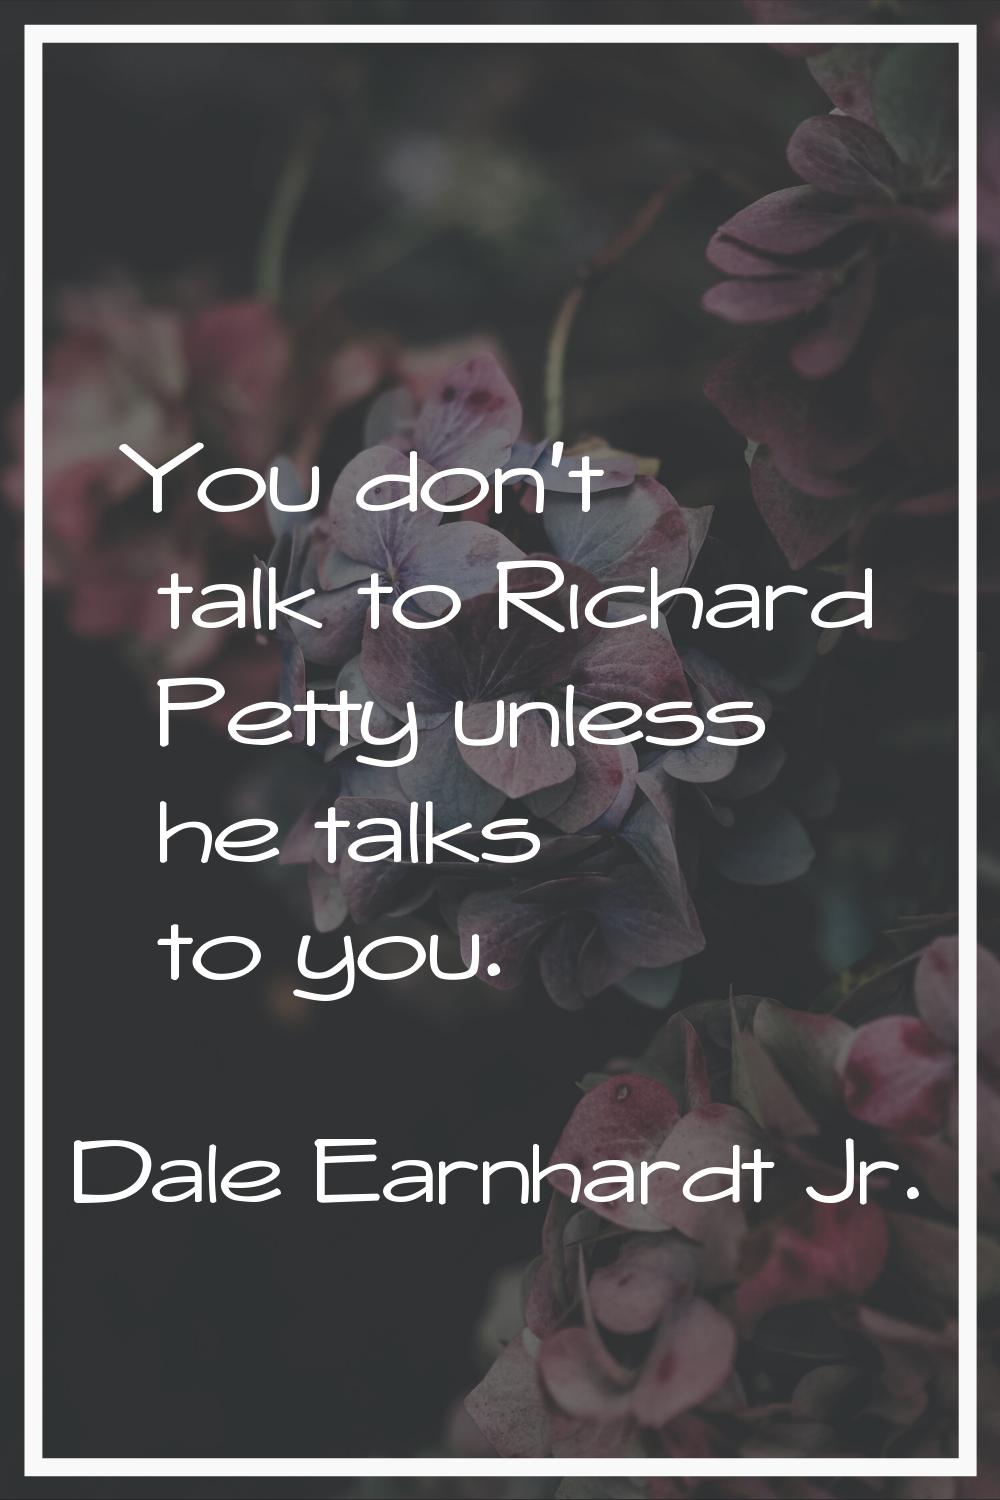 You don't talk to Richard Petty unless he talks to you.